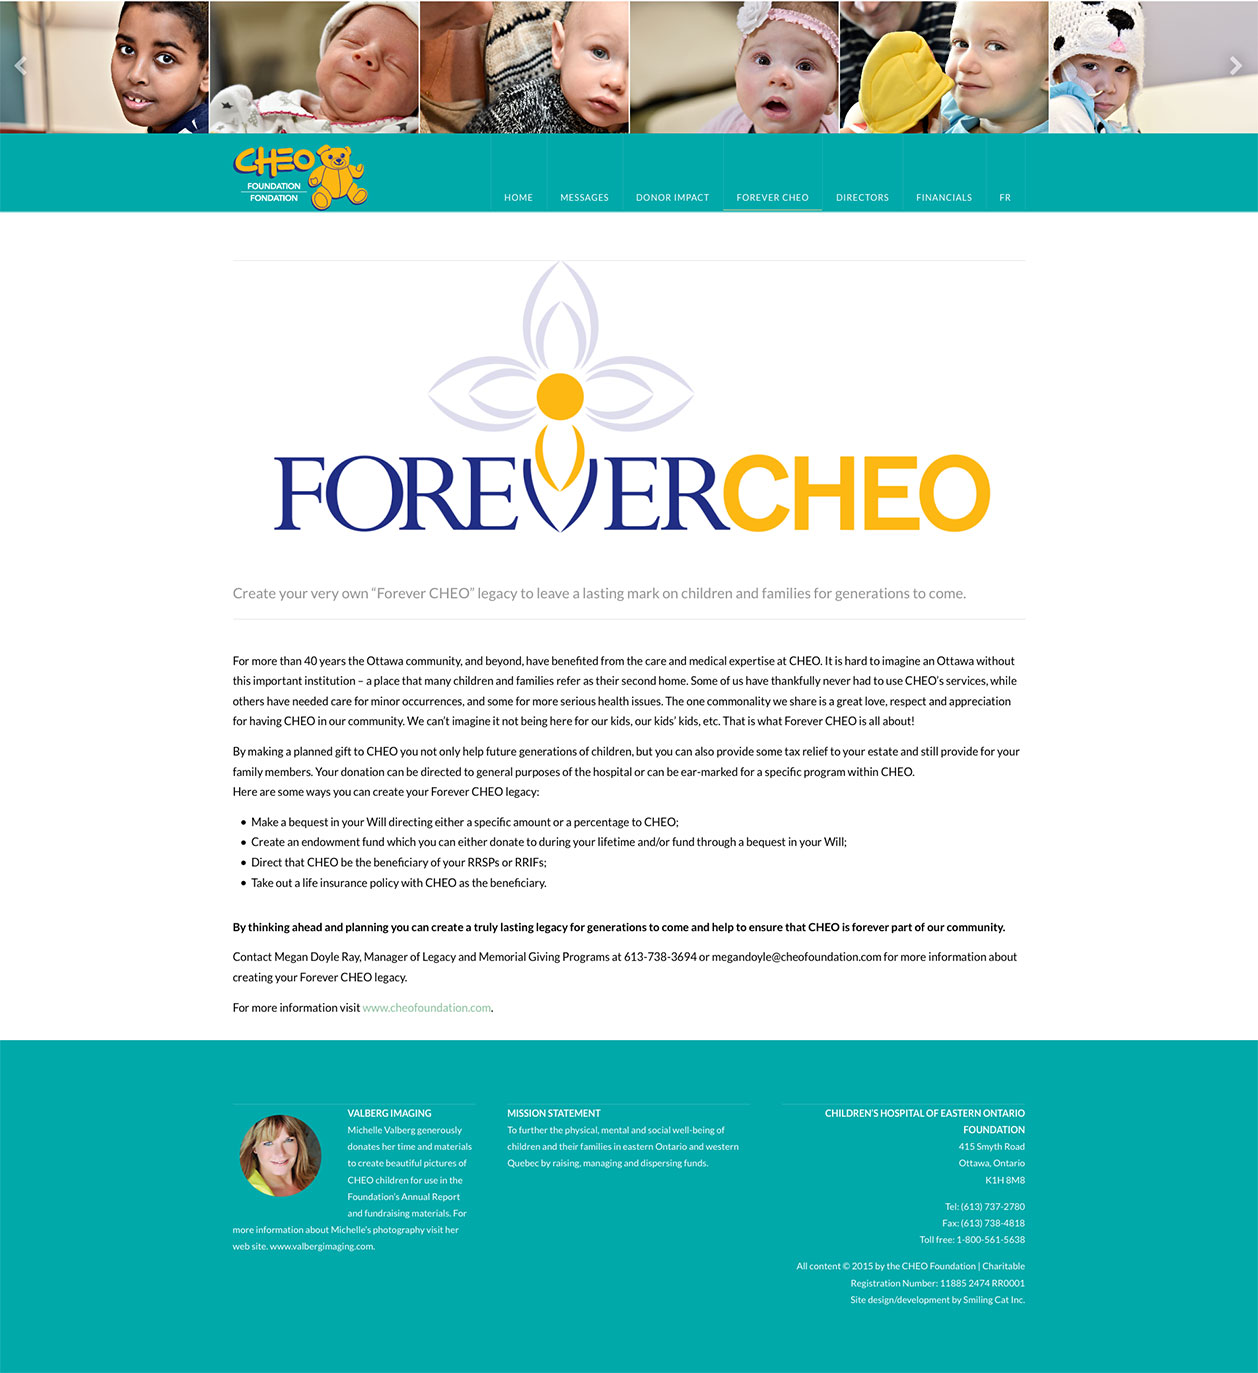 CHEO Foundation Annual Report